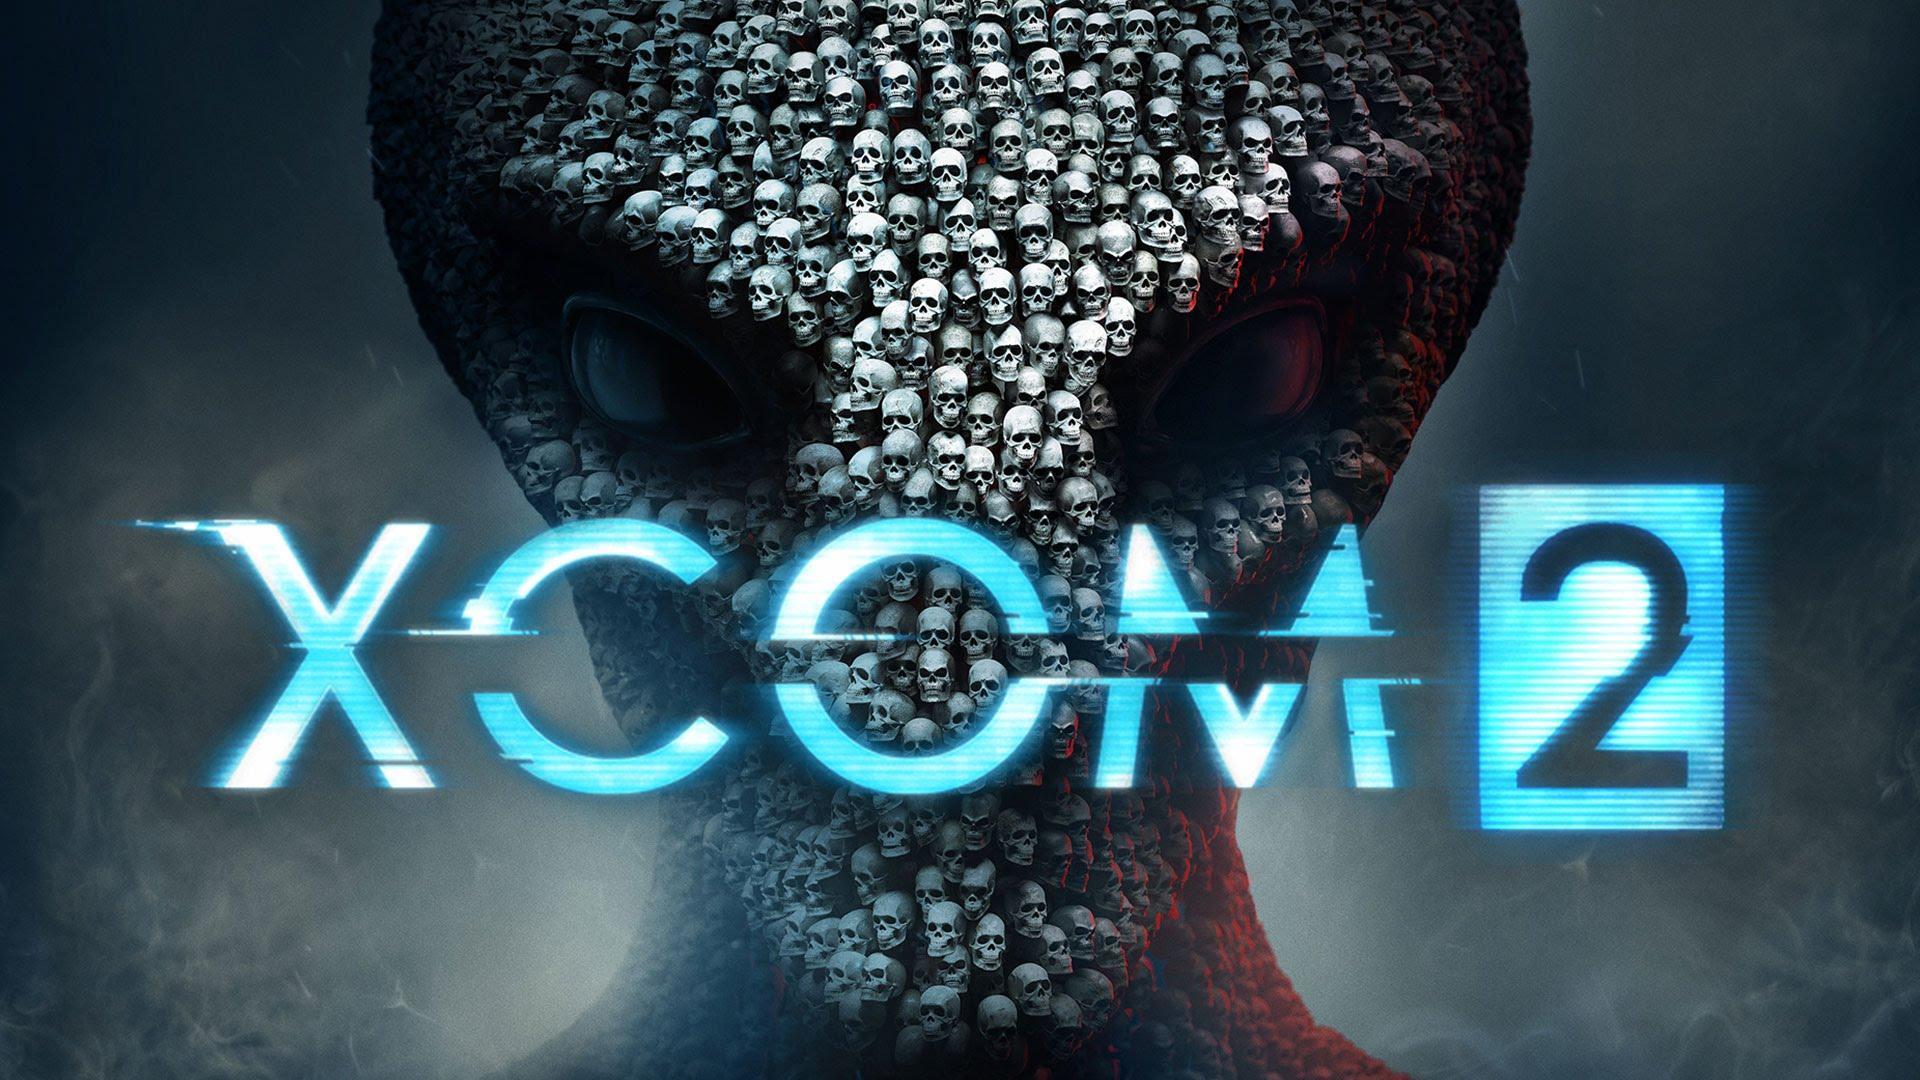 free download xcom 2 collection